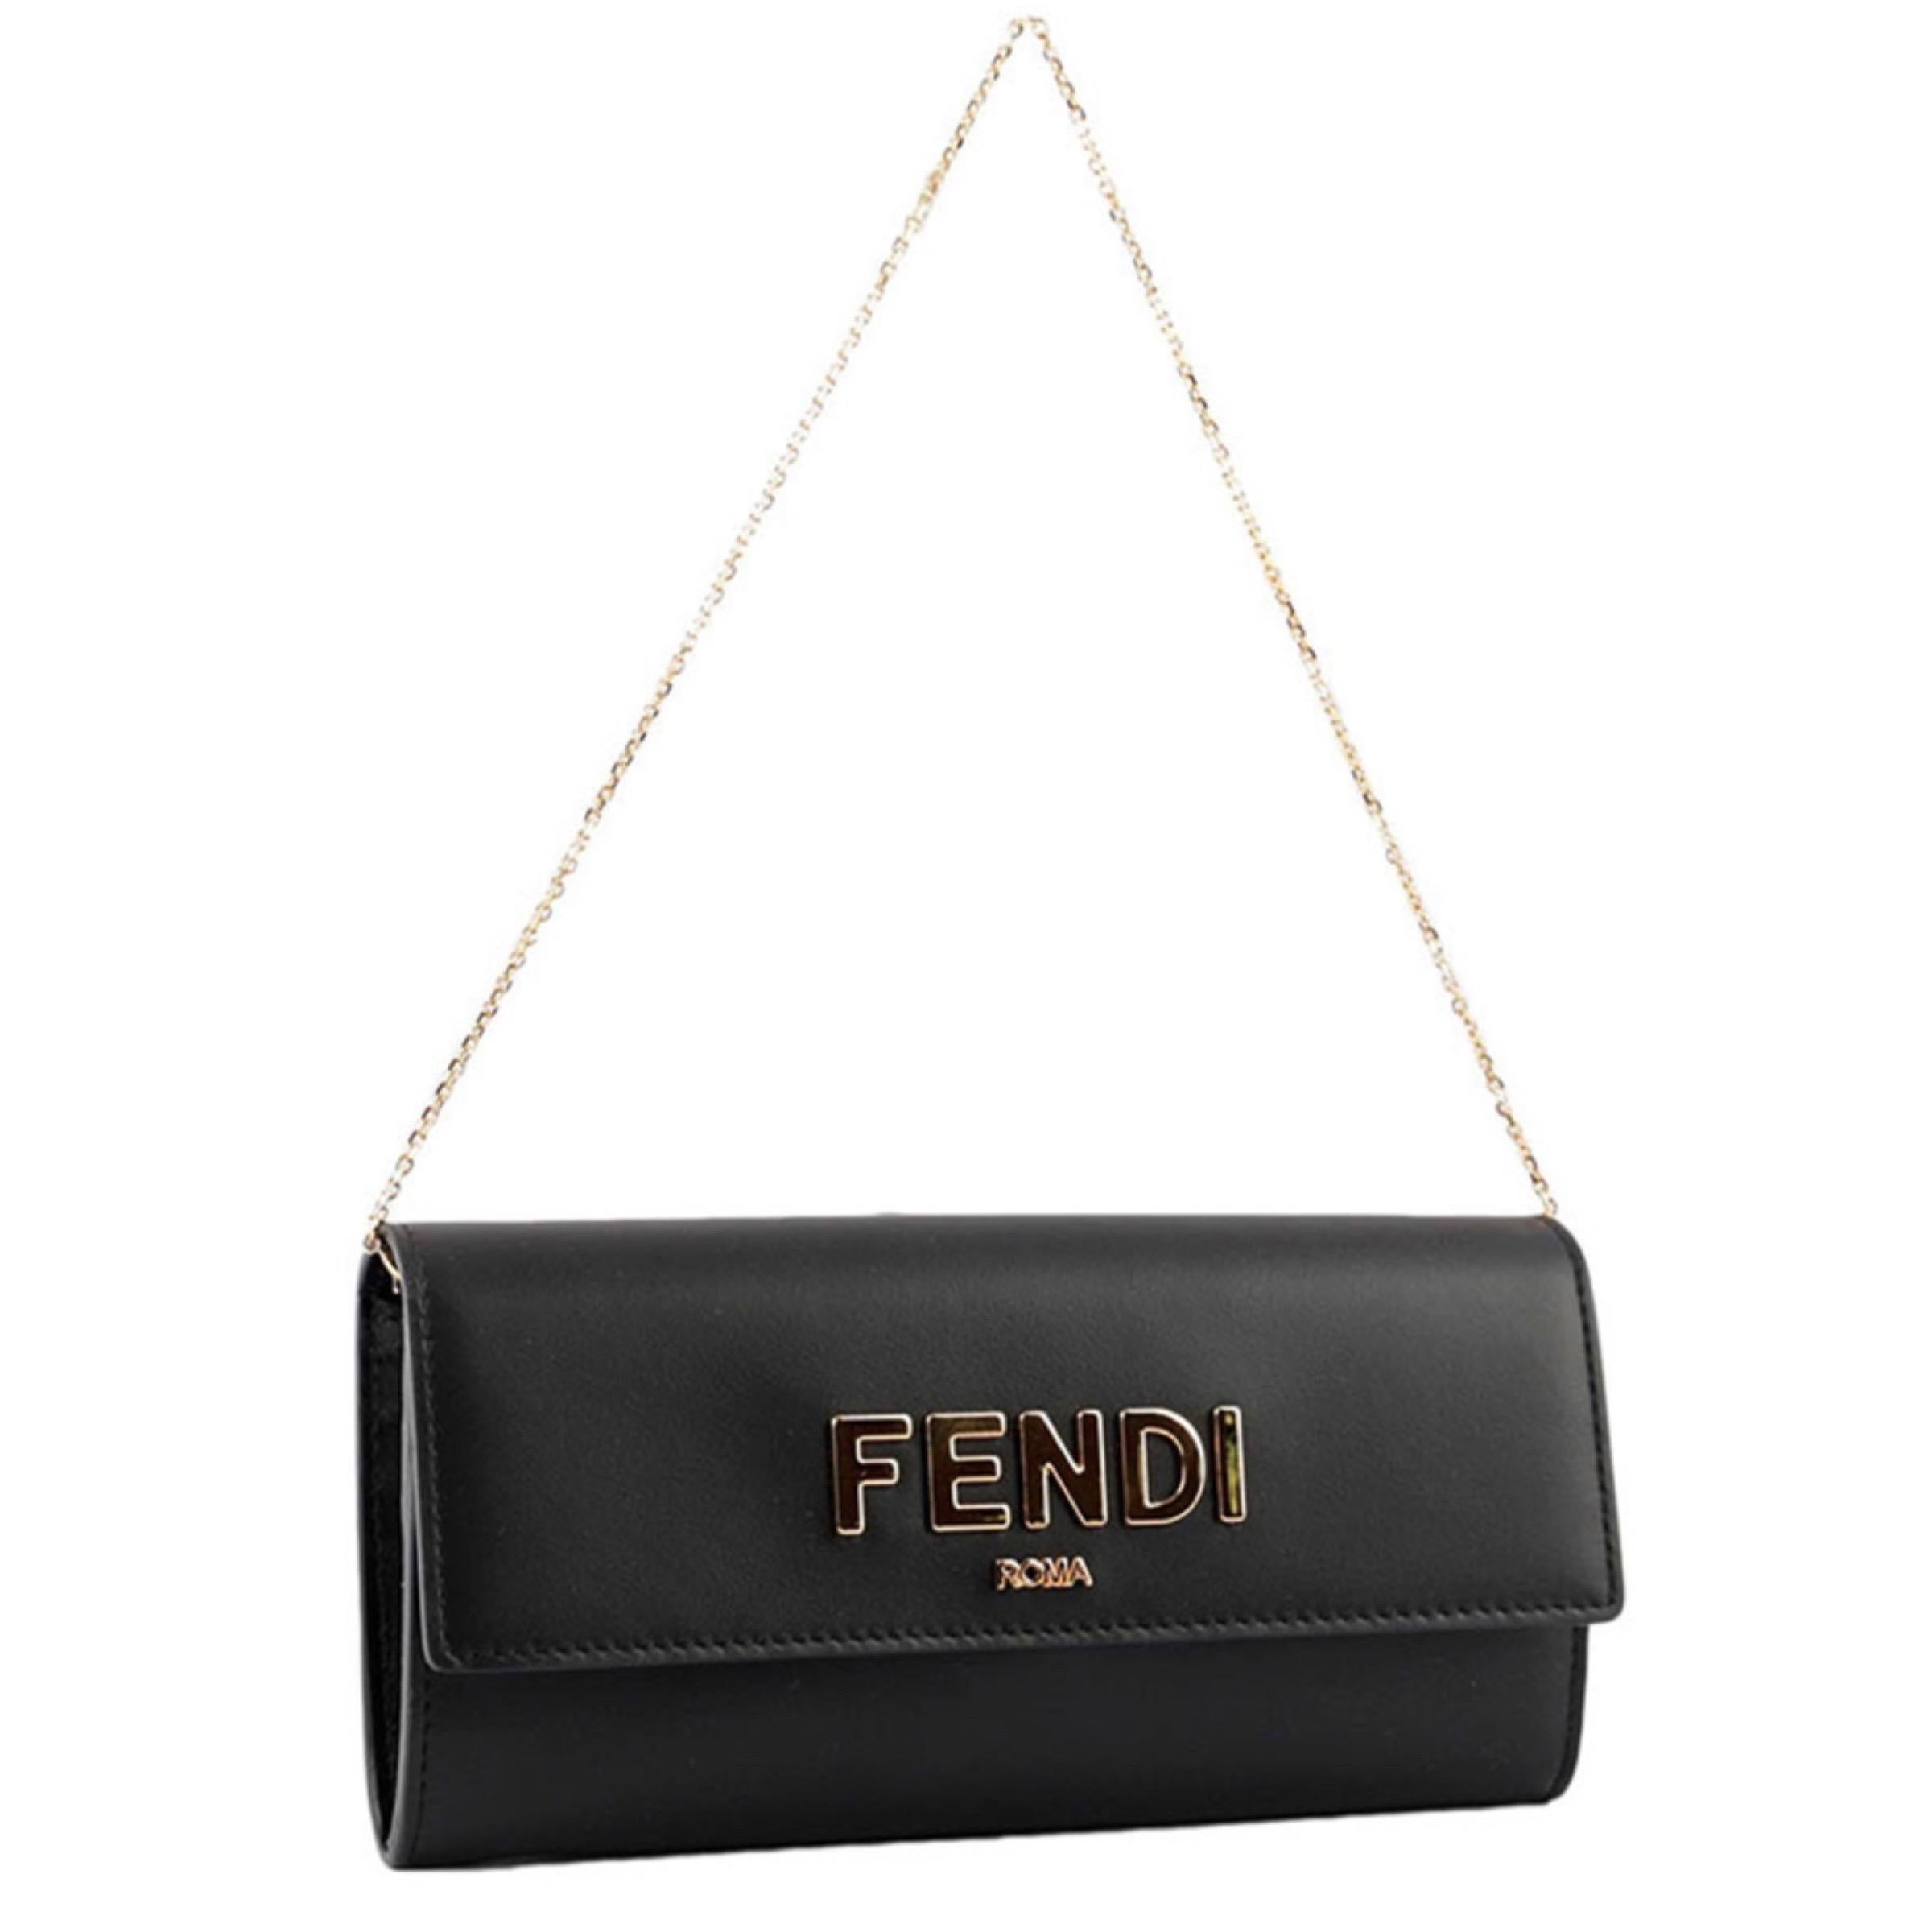 NEW Fendi Black Roma Leather Continental Wallet Clutch Crossbody Bag For Sale 3